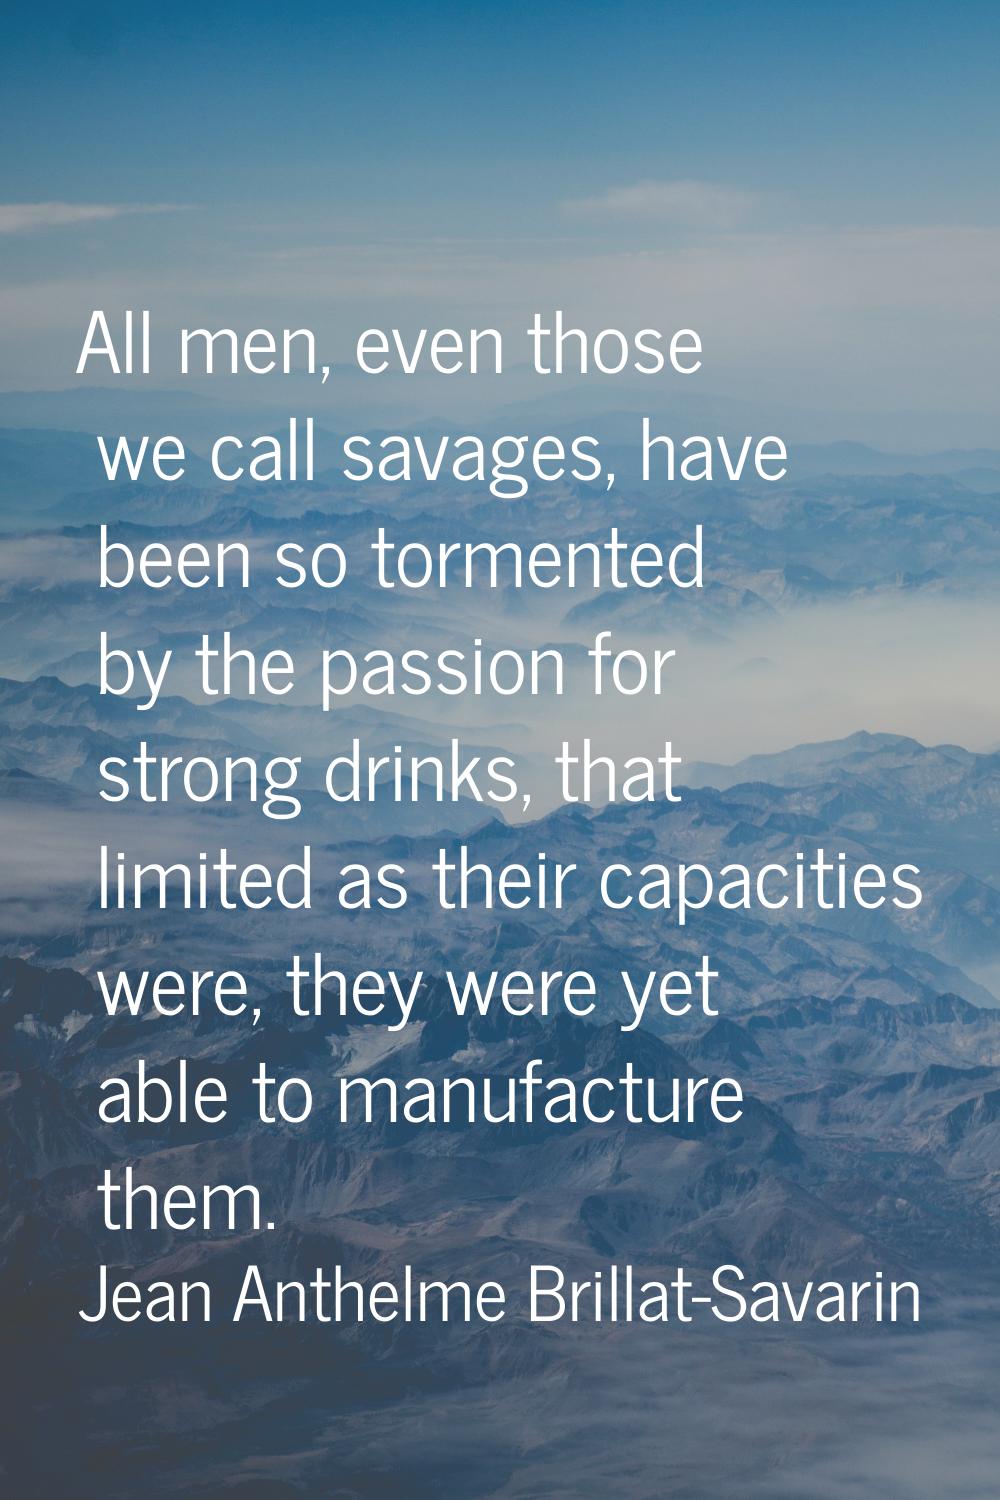 All men, even those we call savages, have been so tormented by the passion for strong drinks, that 